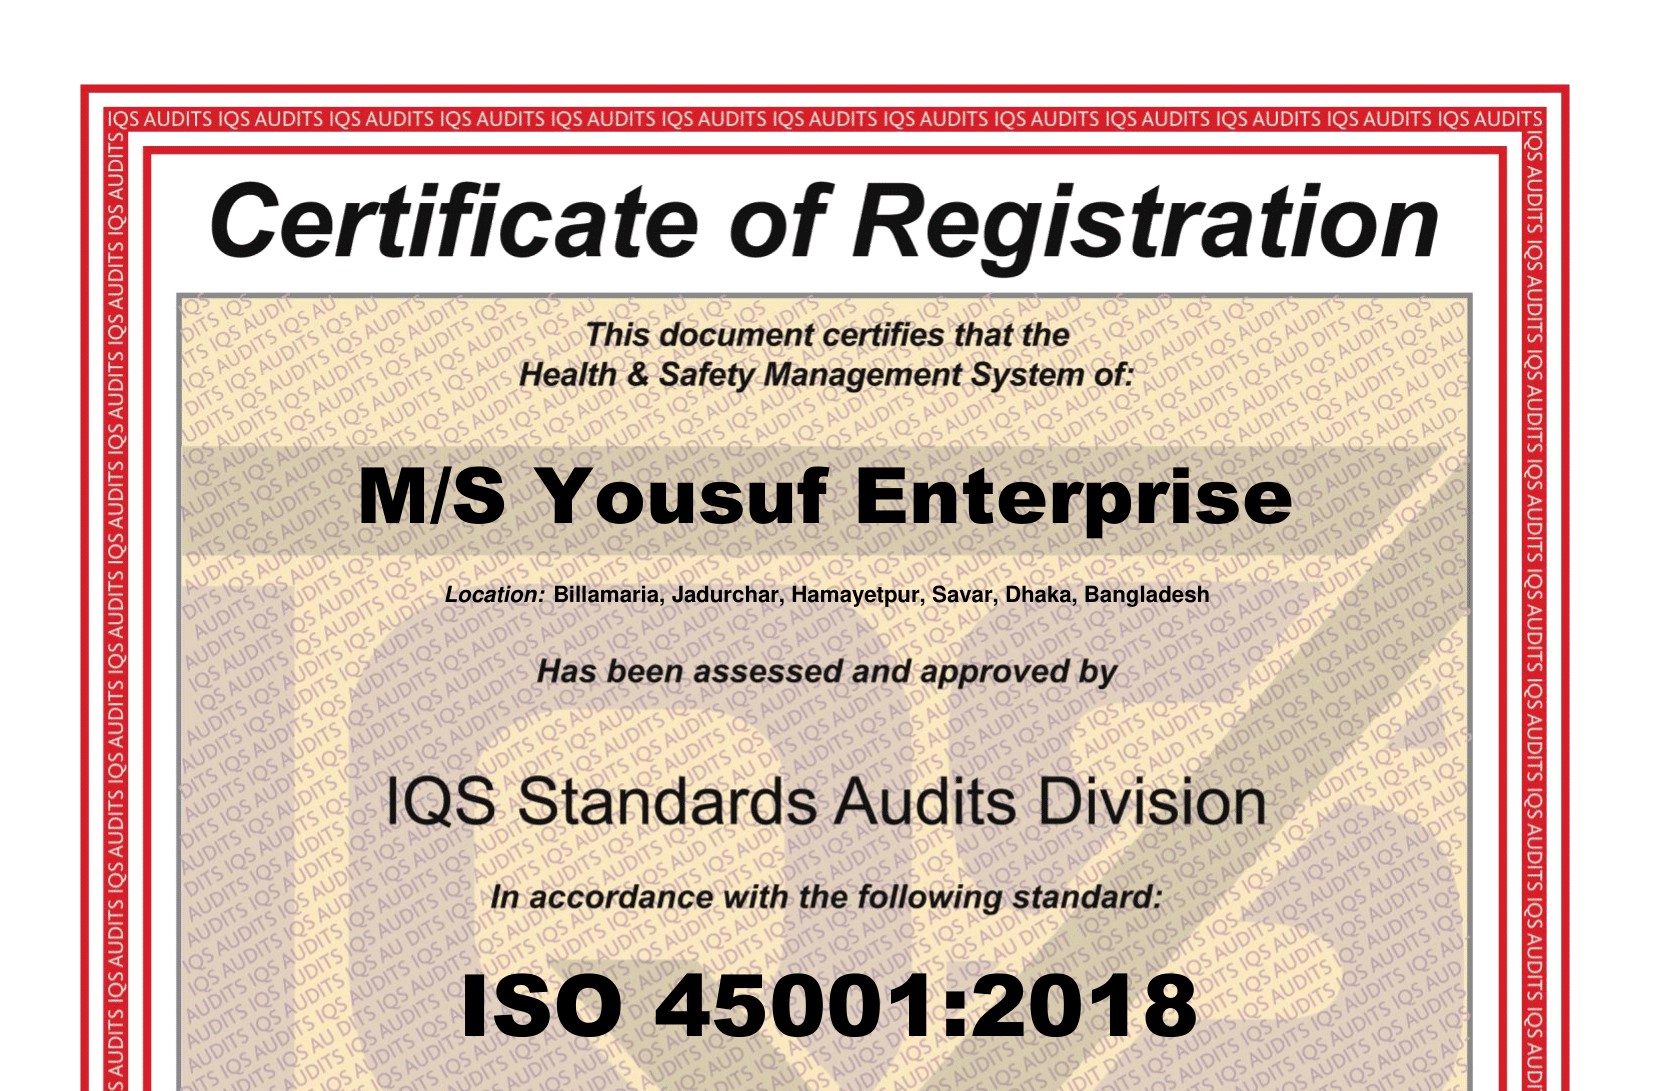 iso 45001 certificate